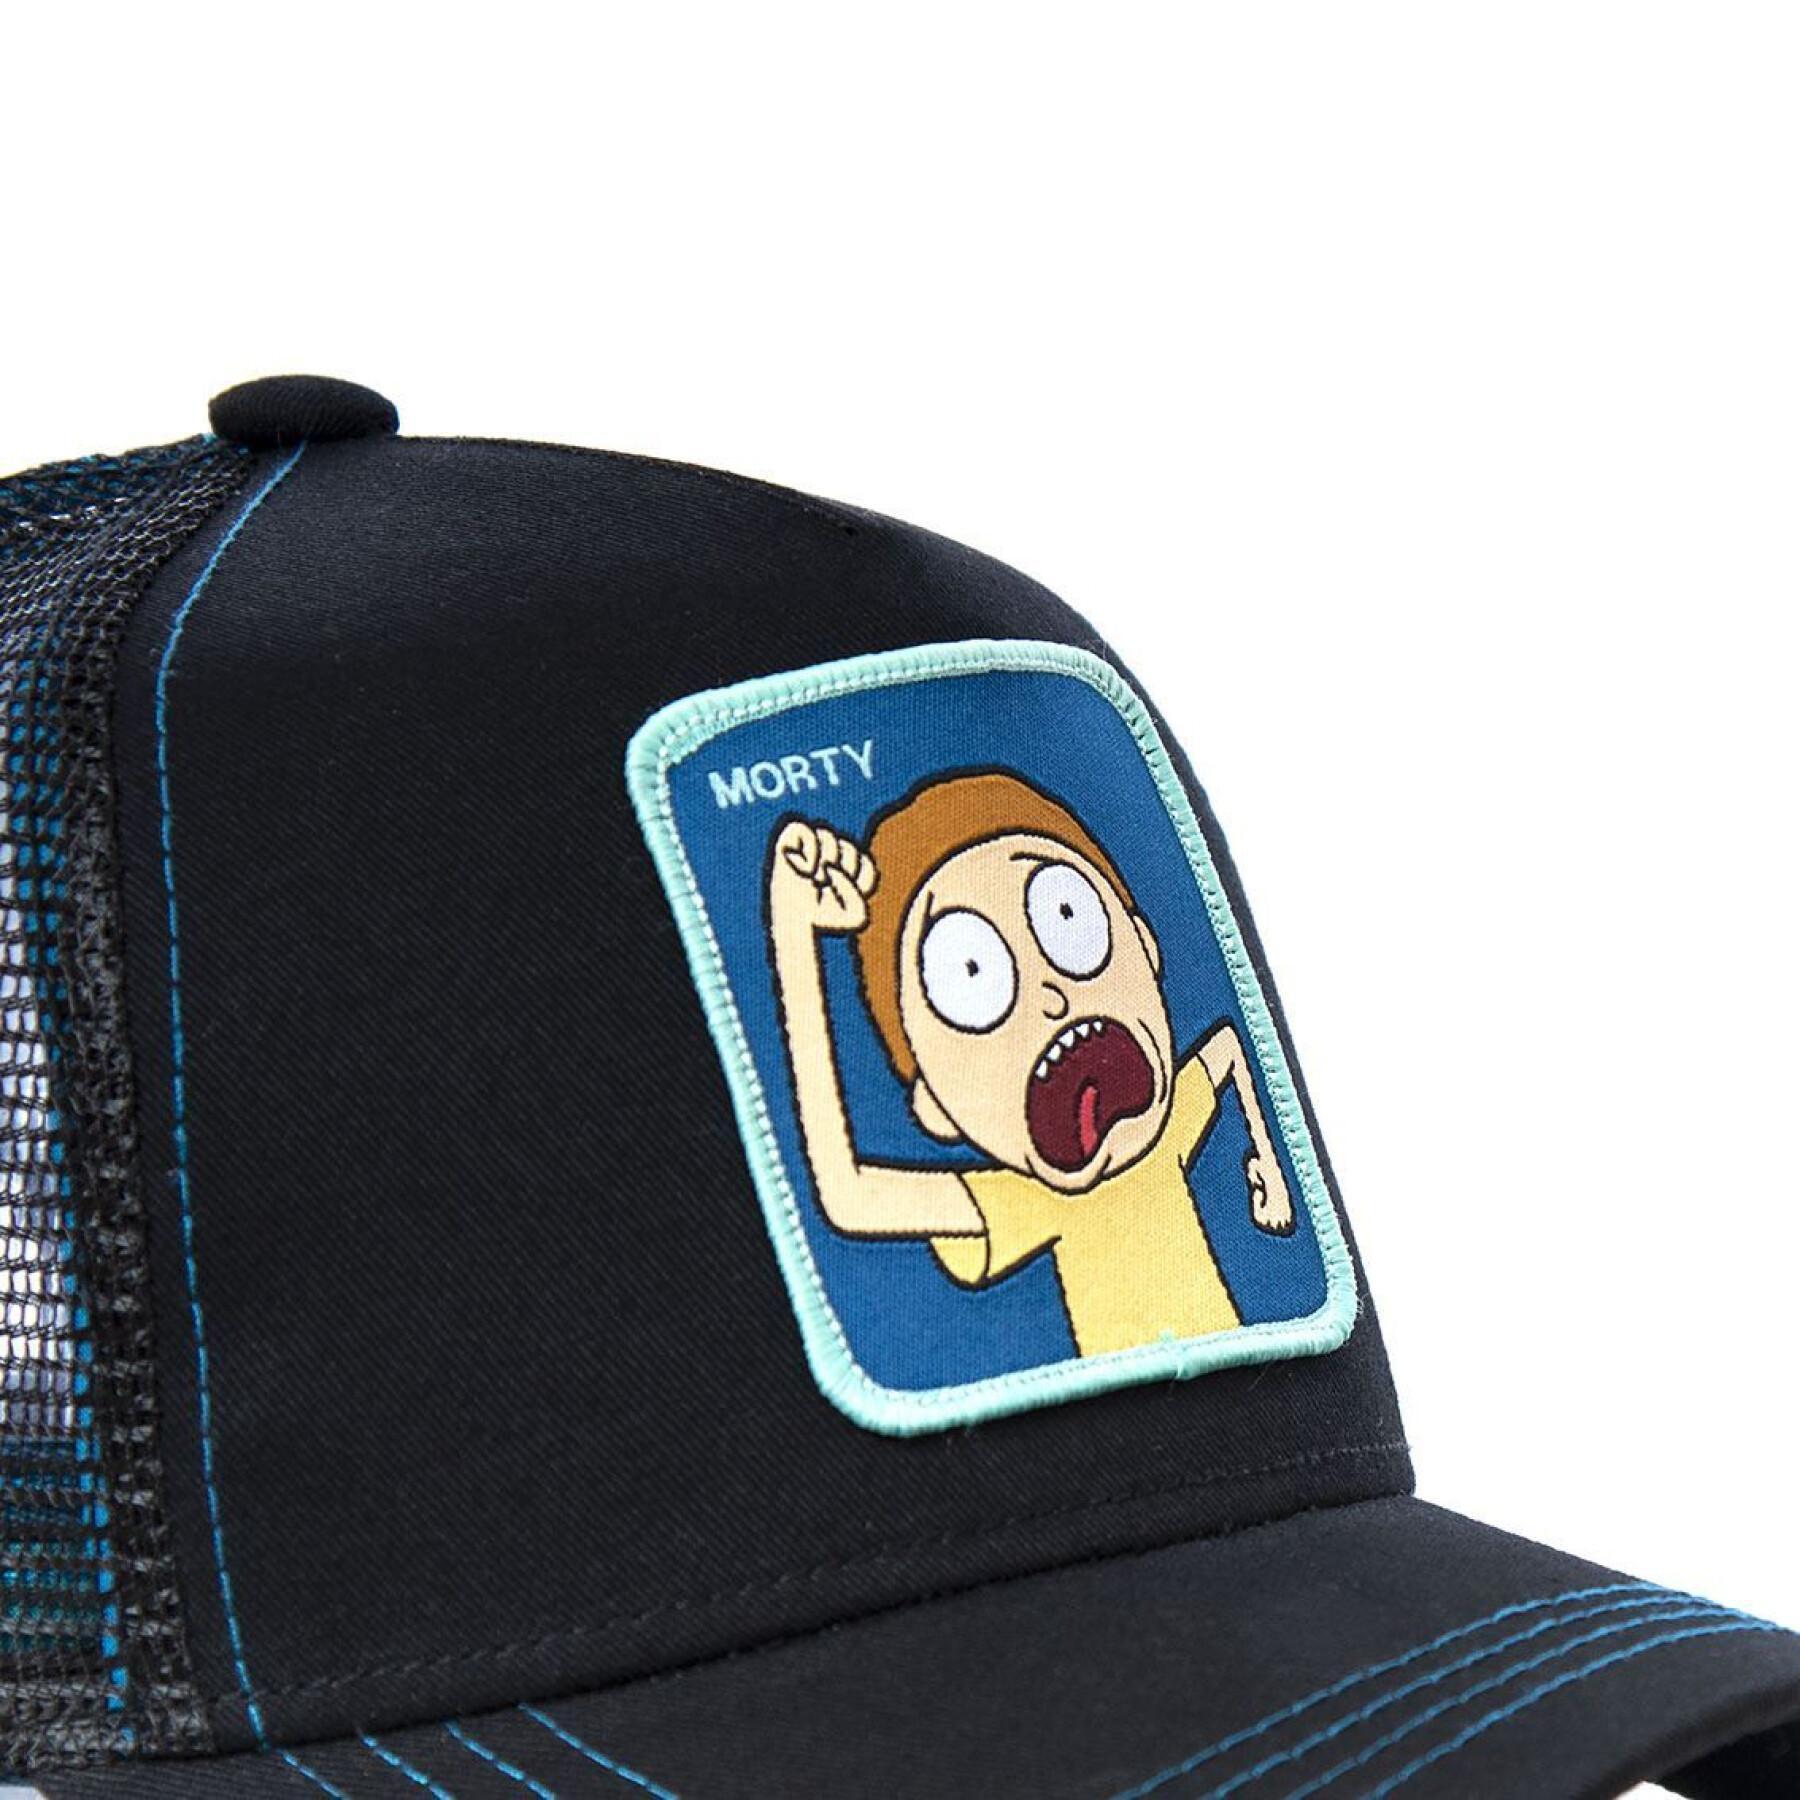 Cappello Serge Capslab Ricky et Morty